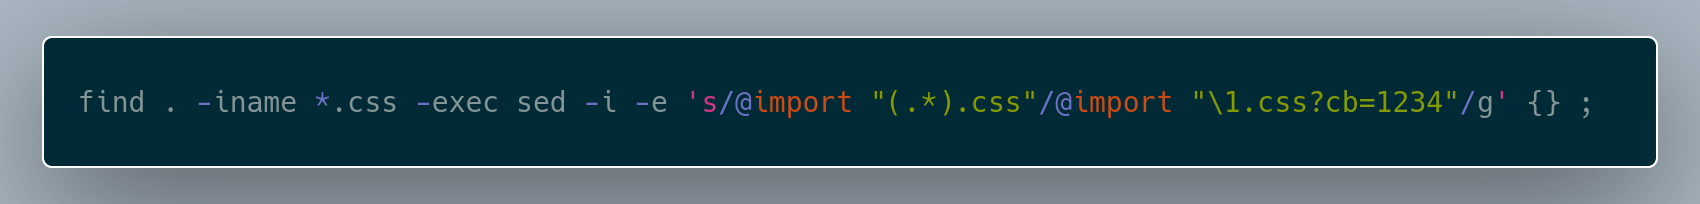 Quickly add a cachebuster to @import statements